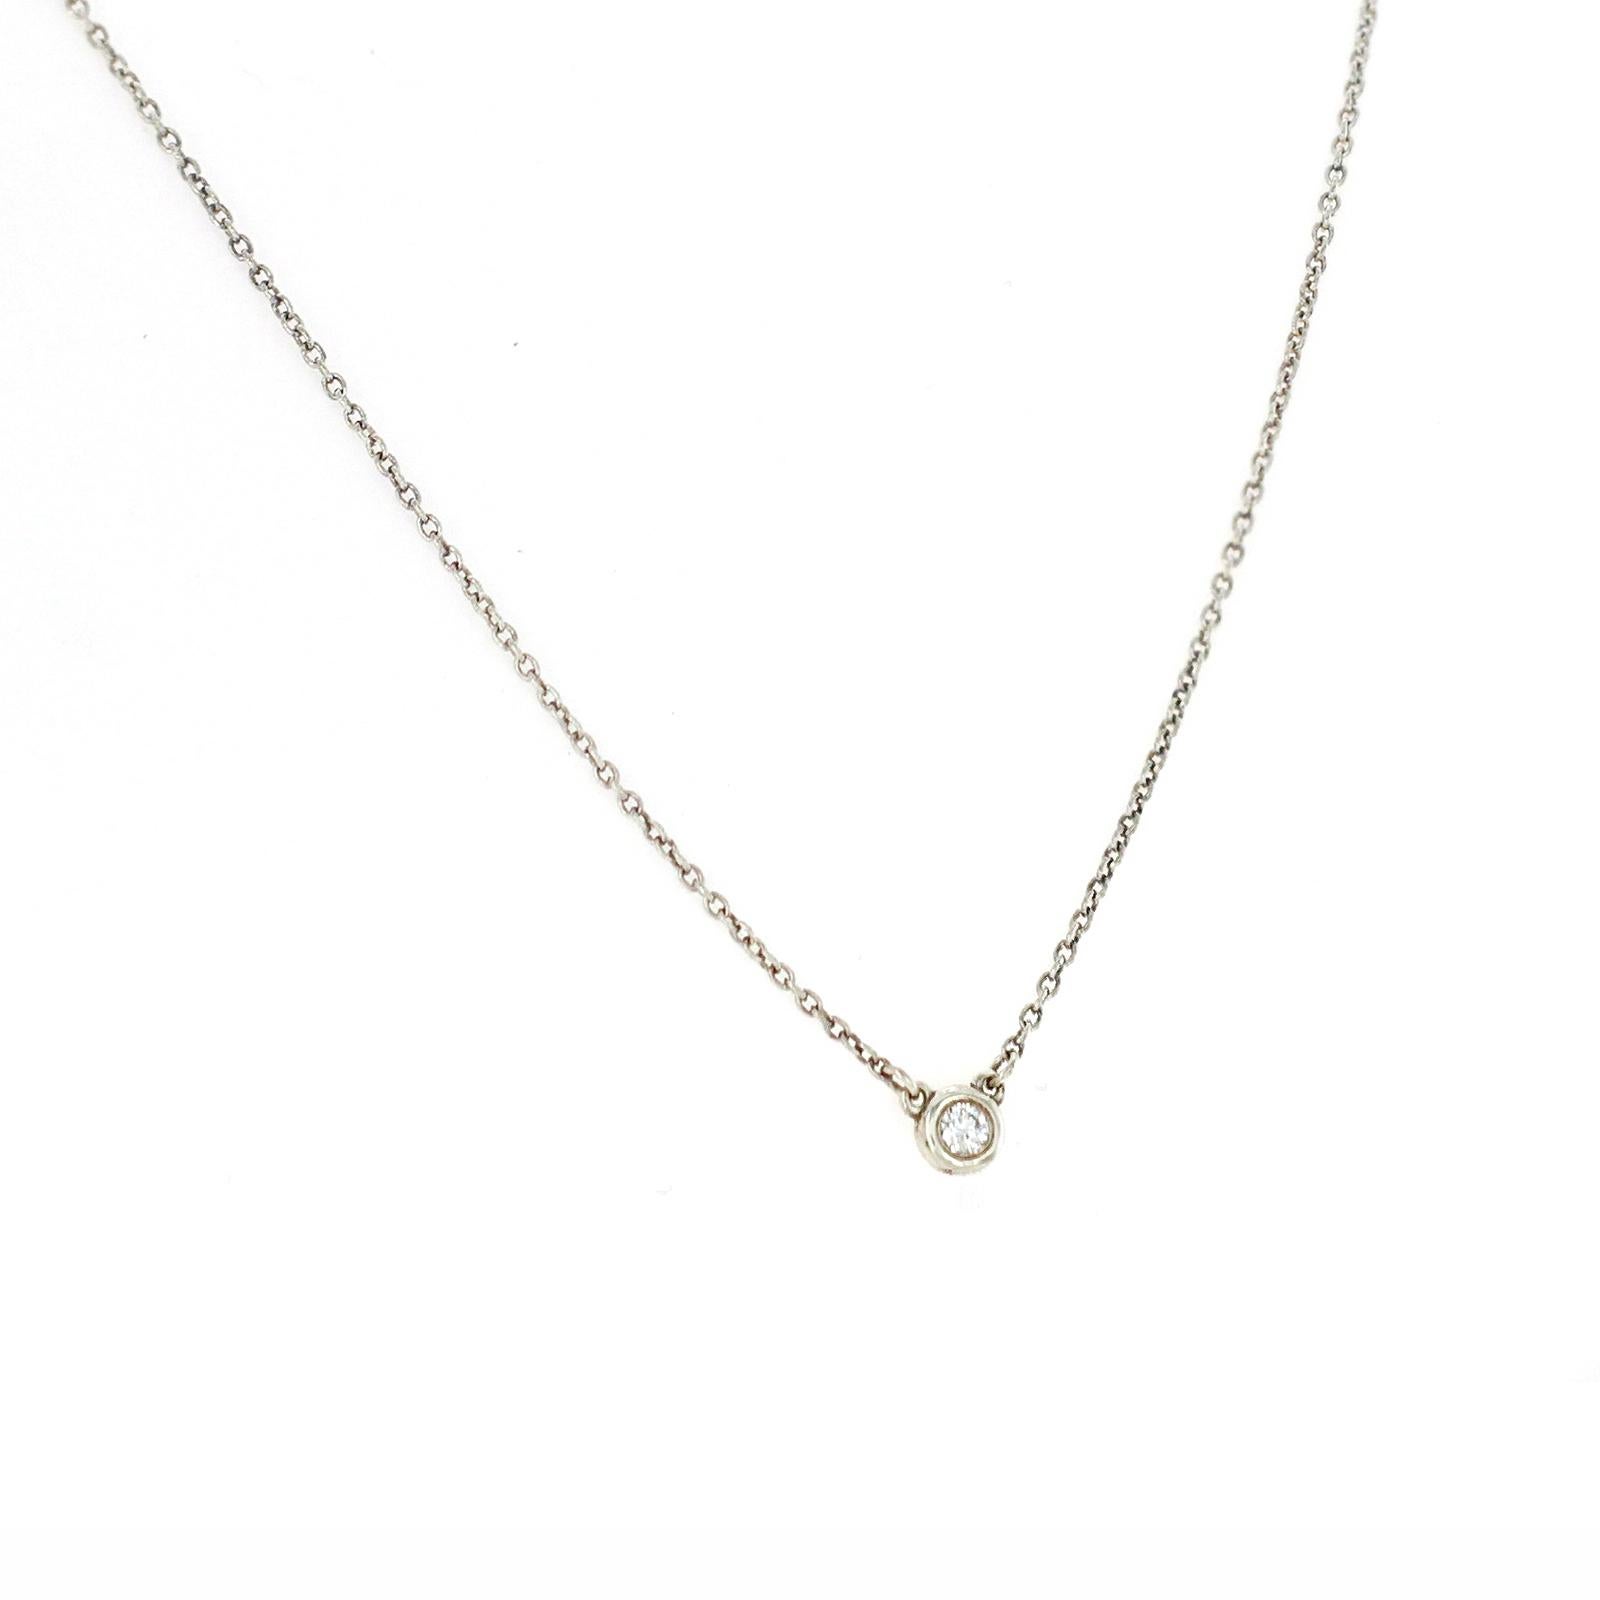 100% Authentic, 100% Customer Satisfaction

Pendant: 4.5 mm

Chain: 0.7 mm

Size: 16 Inches

Metal: 925 Sterling Silver 

Hallmarks: T&CO 925

Total Weight: 1.6 Grams

Stone Type: 0.05 CT Diamond

Condition: Pre Owned 

Estimated Price: $550

Stock